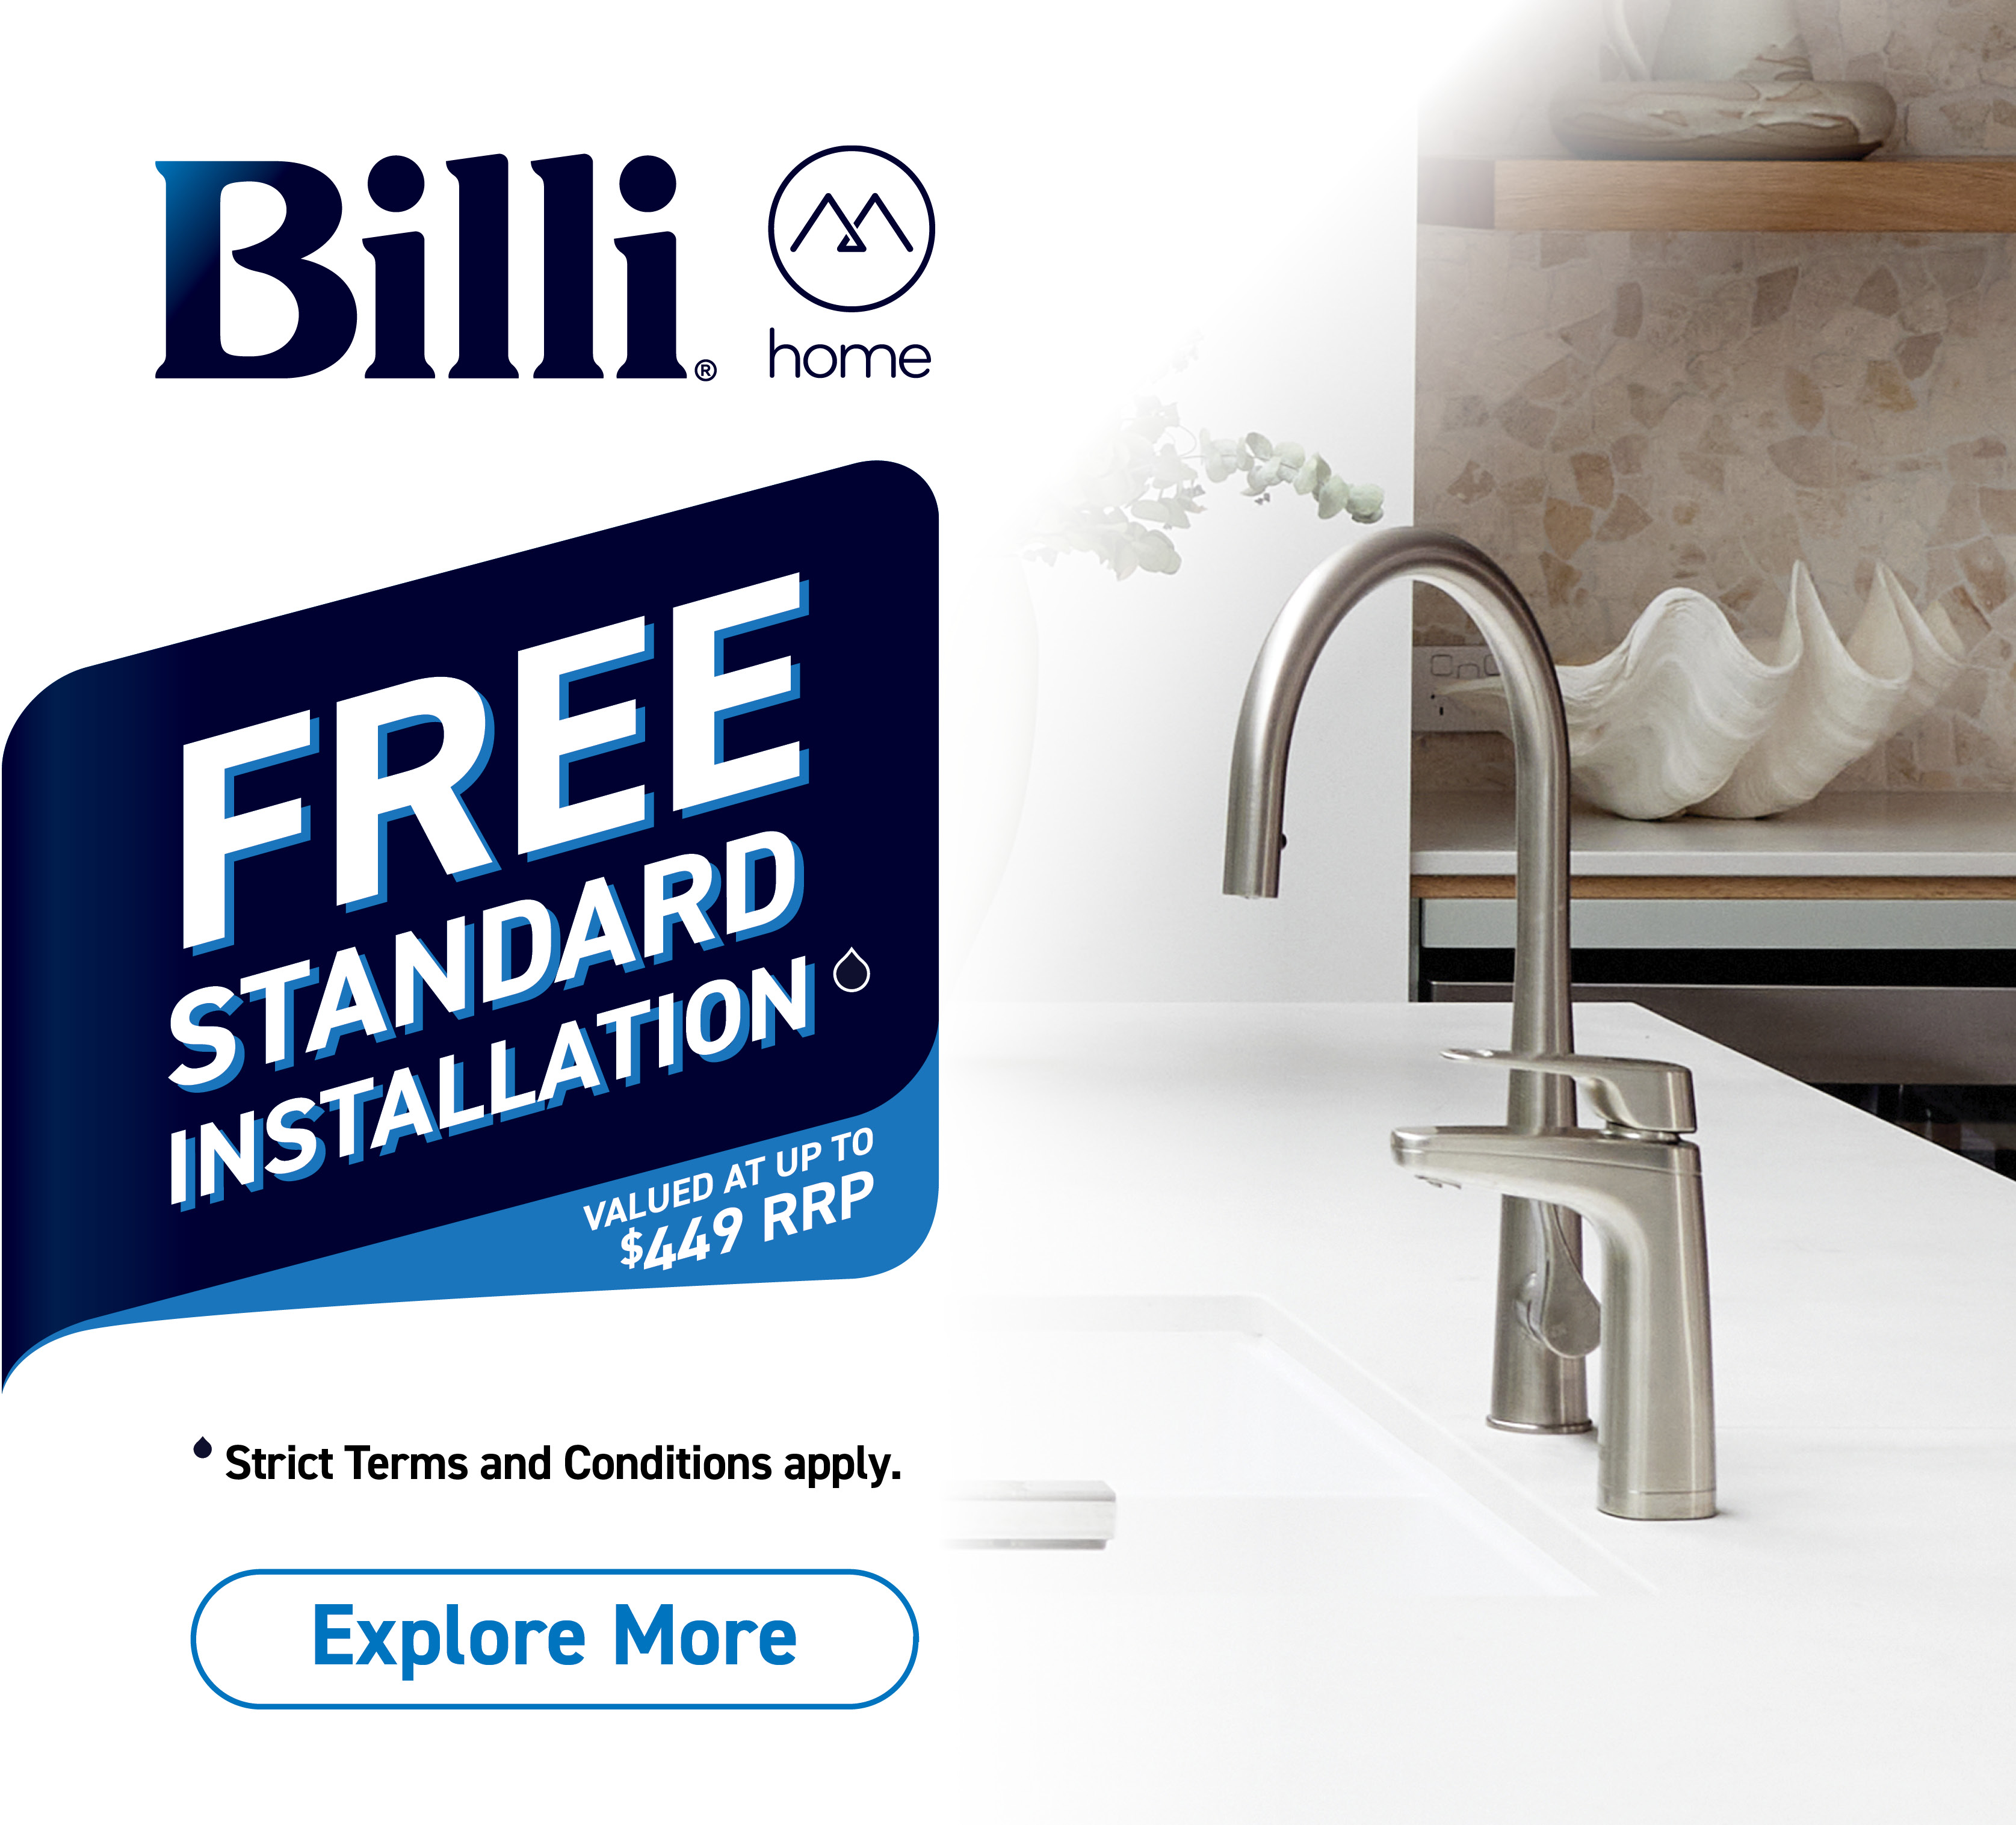 Free Standard Installation Valued Up To $449* with Selected Billi Taps